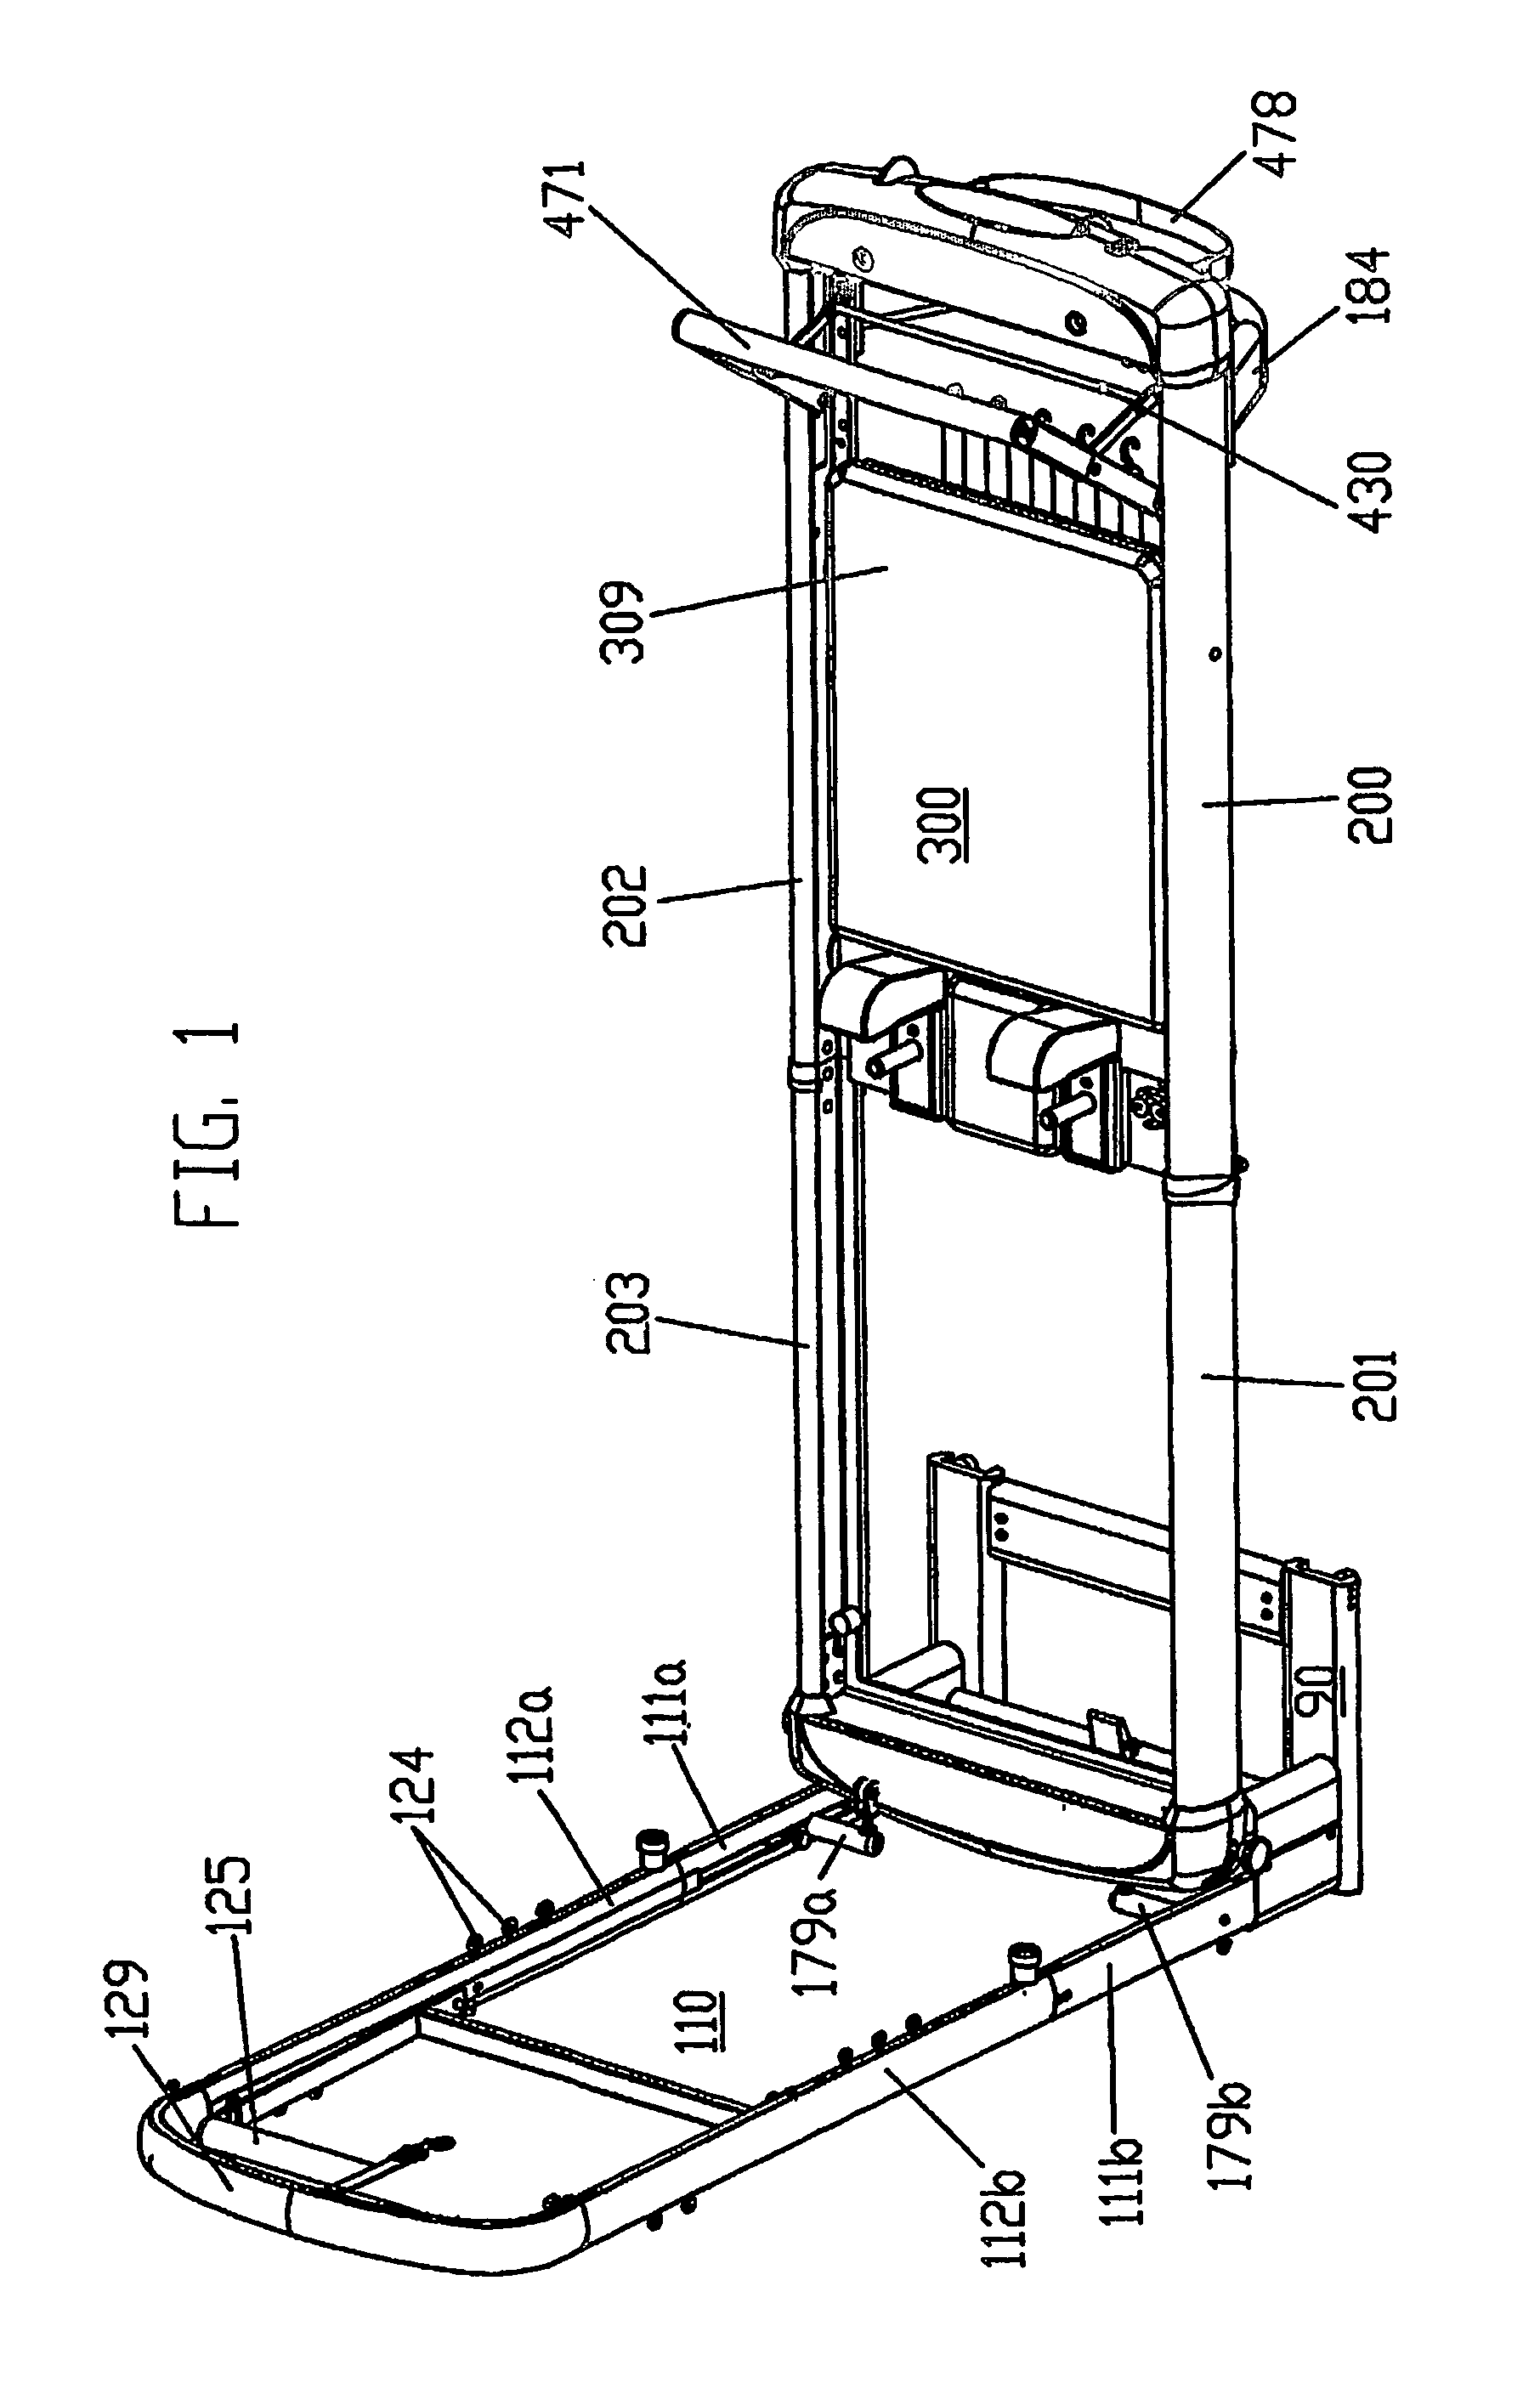 Foldable transportable multiple function pilates exercise apparatus and method